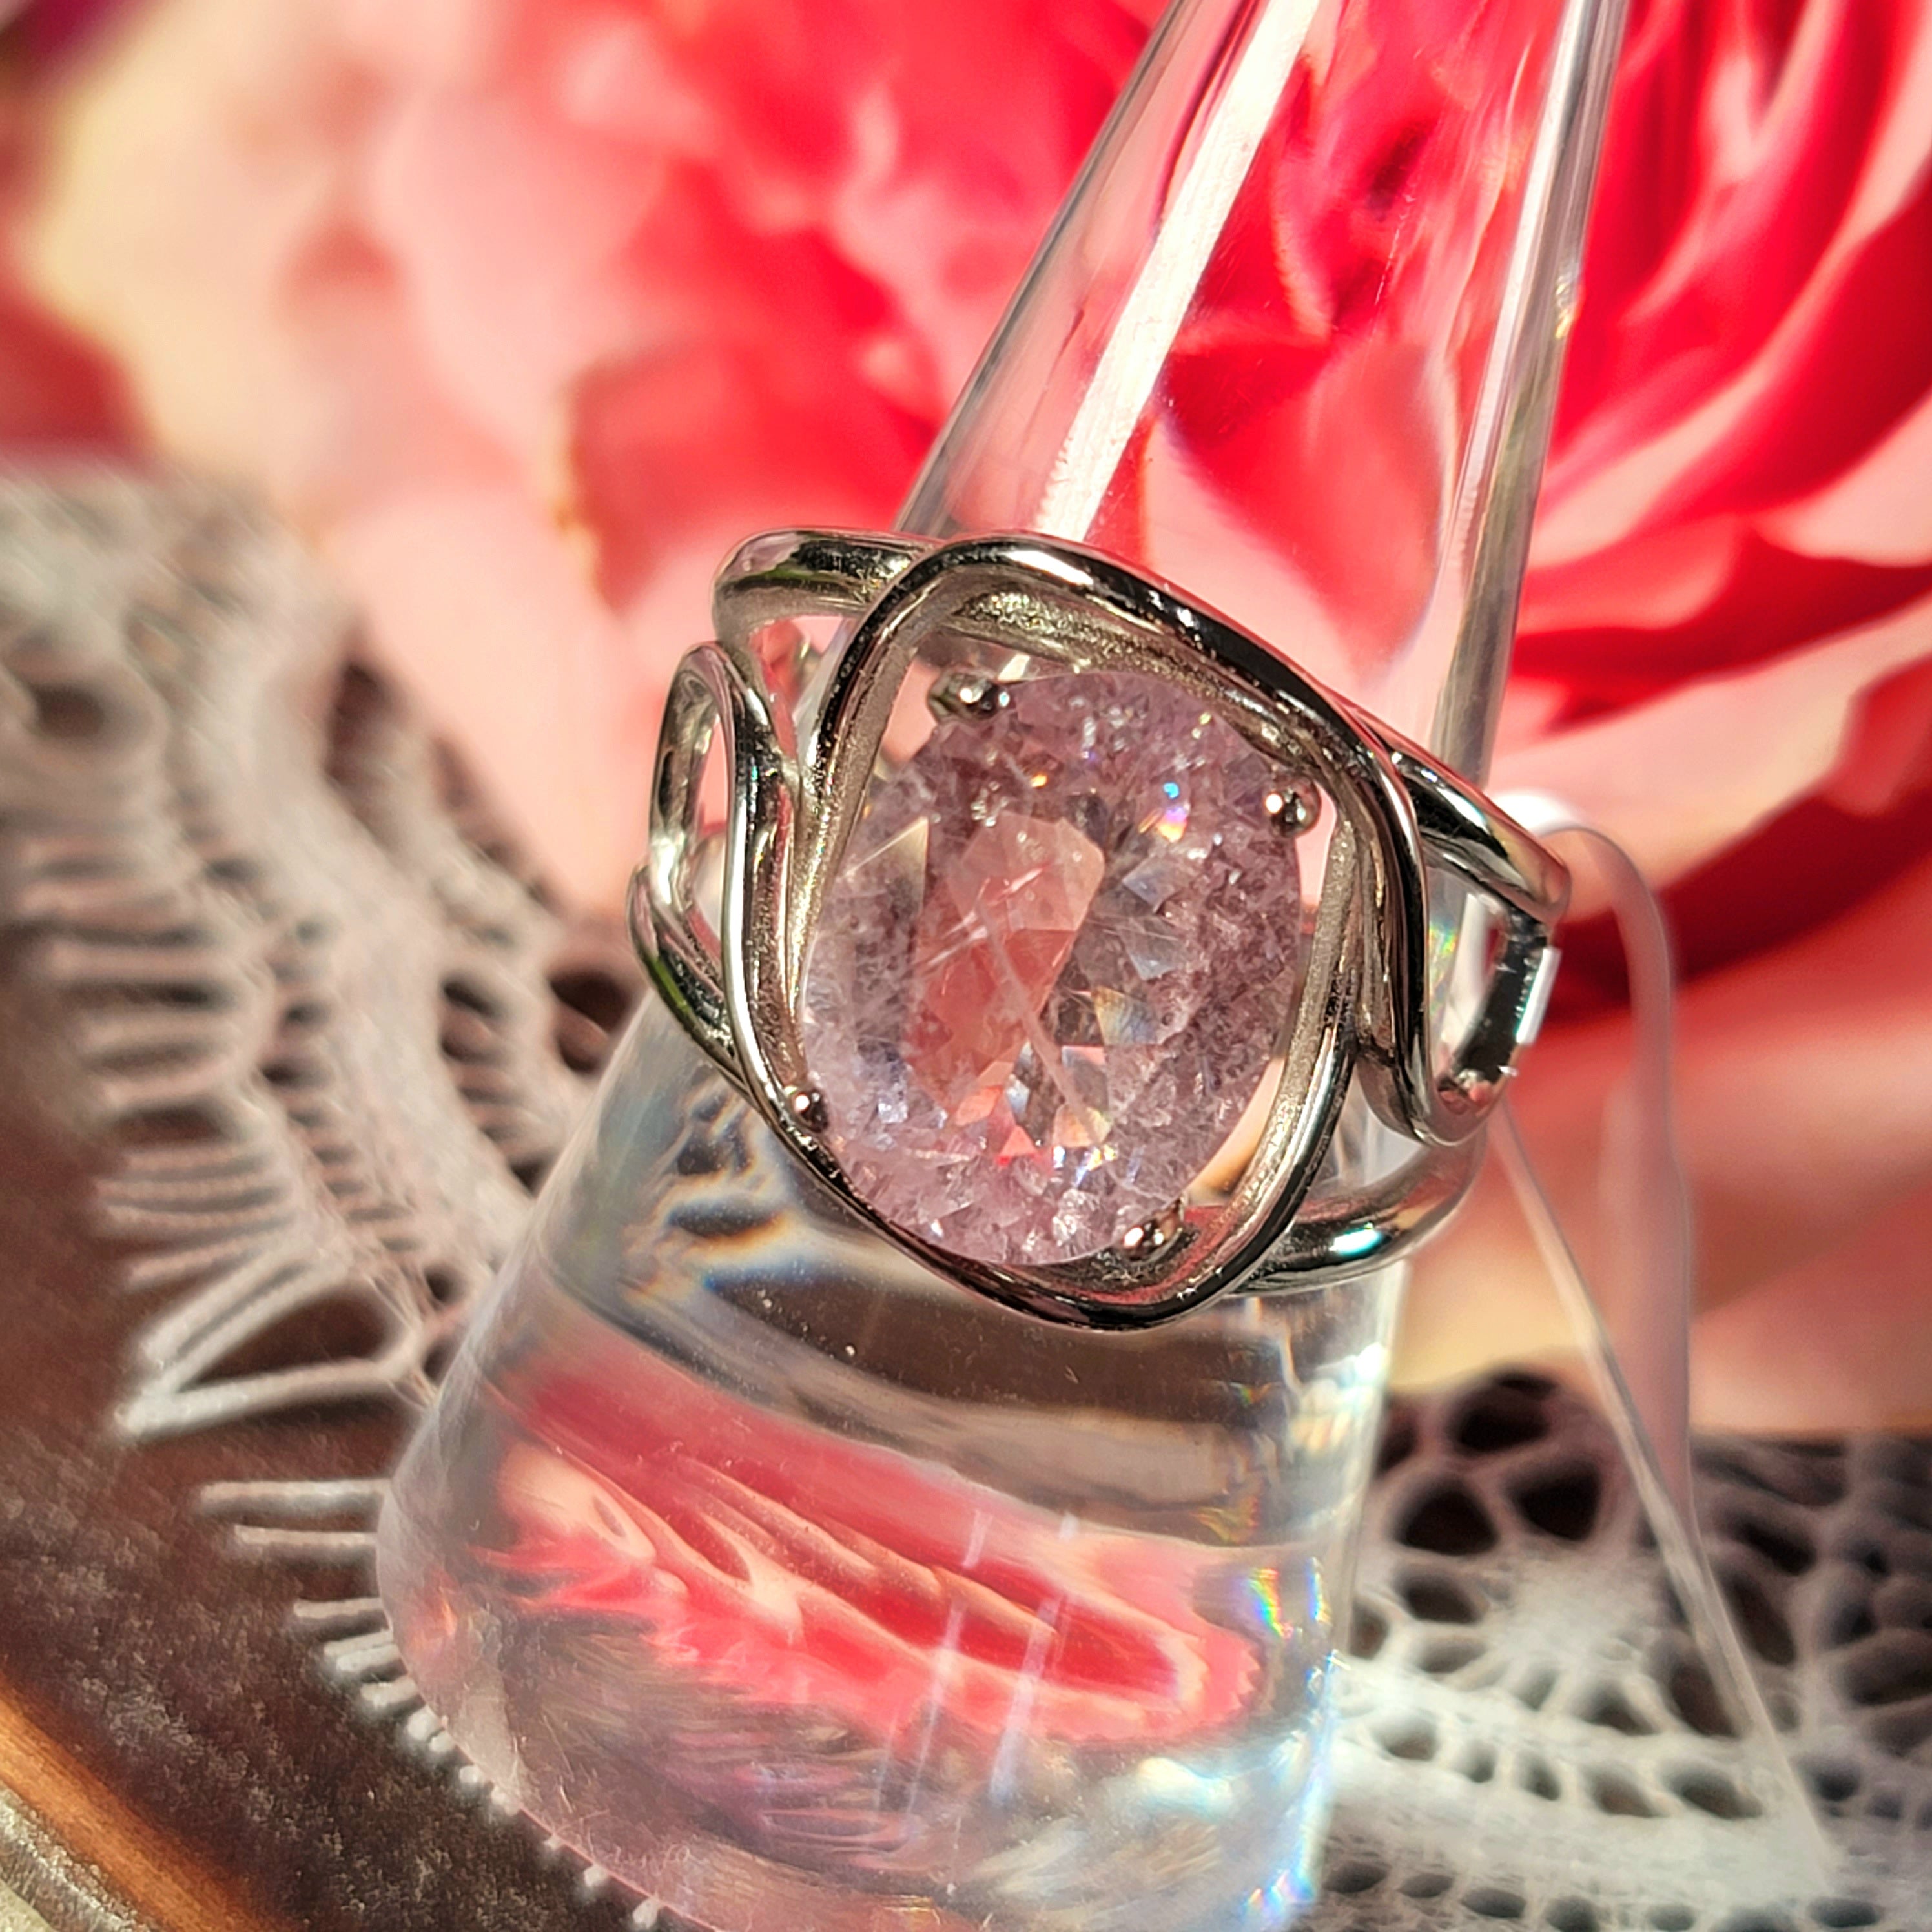 Morganite Adjustable Finger Cuff Ring .925 Silver for Abundance of Joy and Love